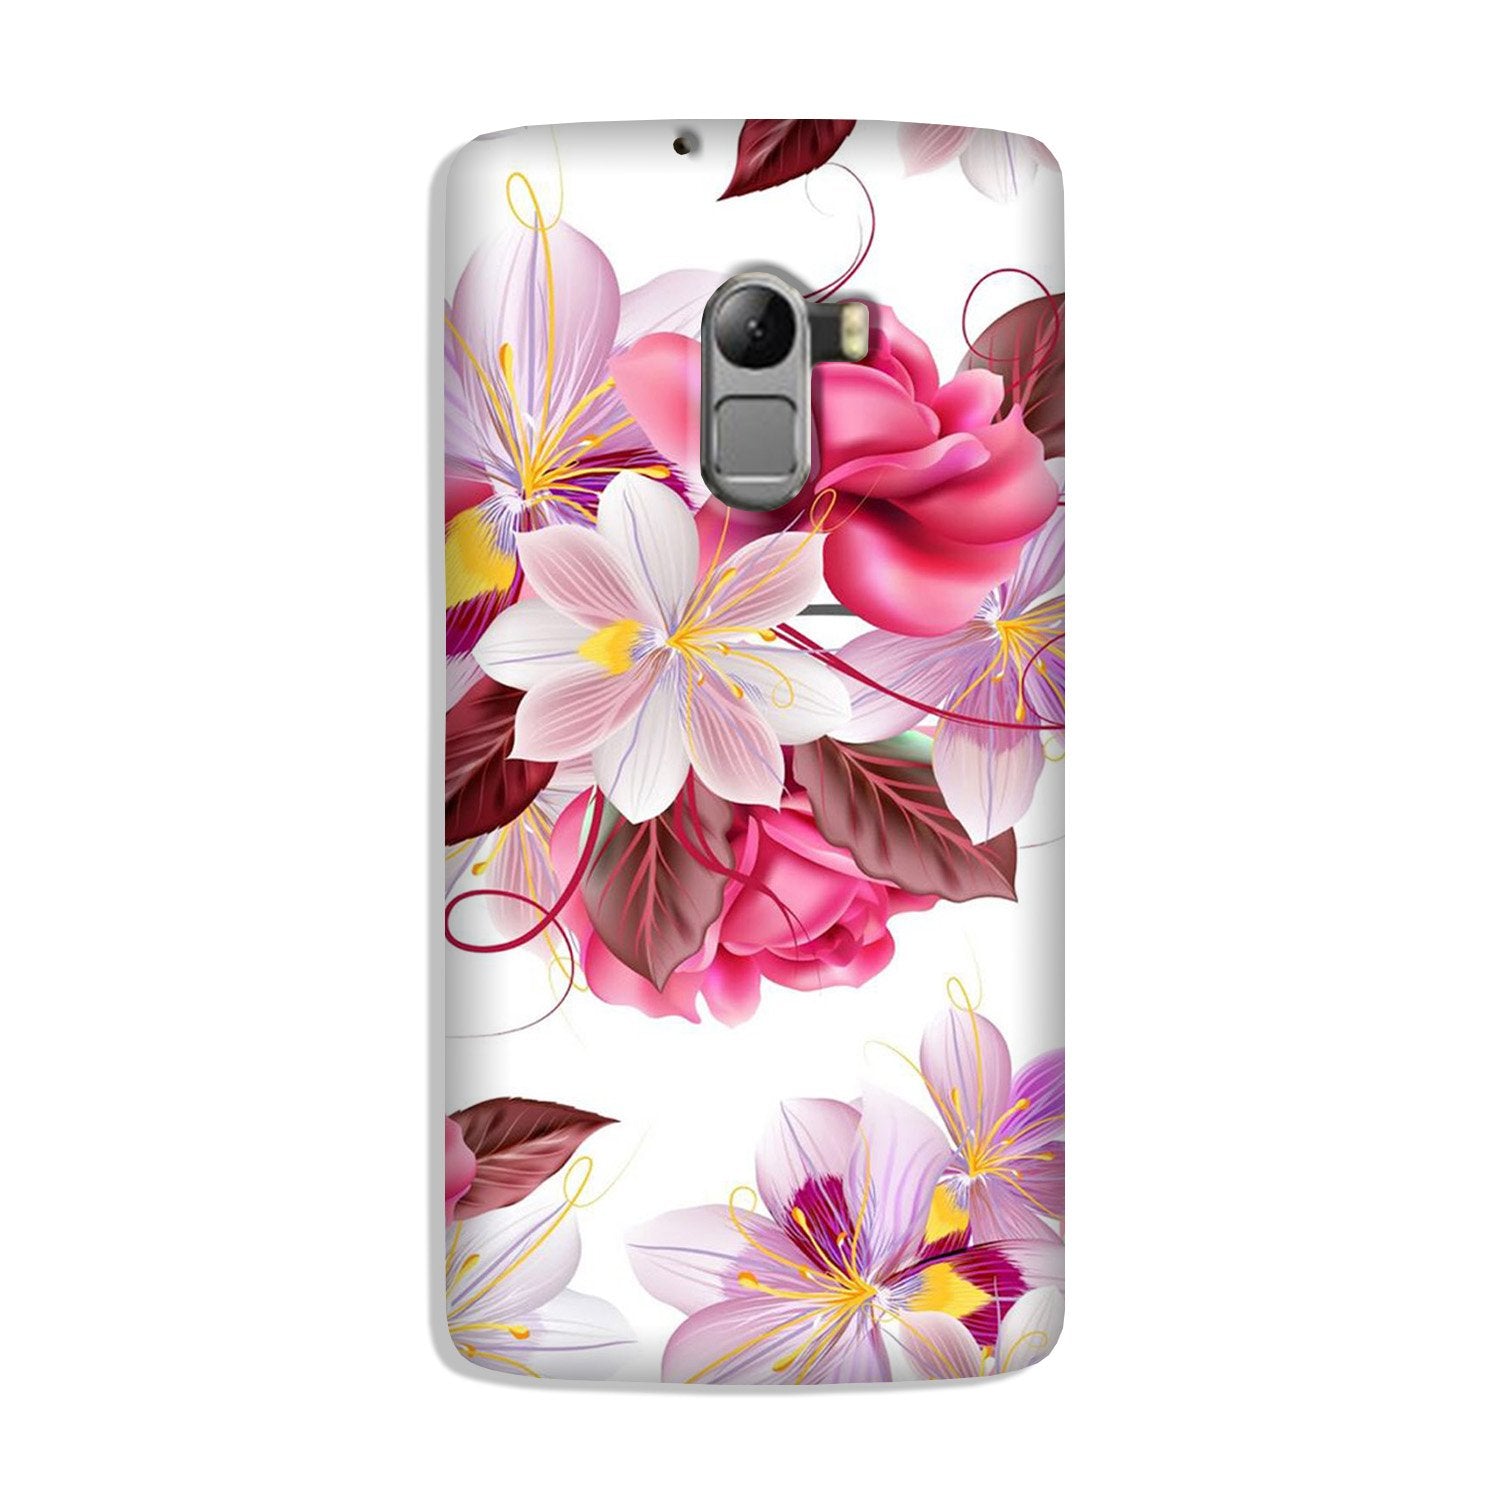 Beautiful flowers Case for Lenovo K4 Note